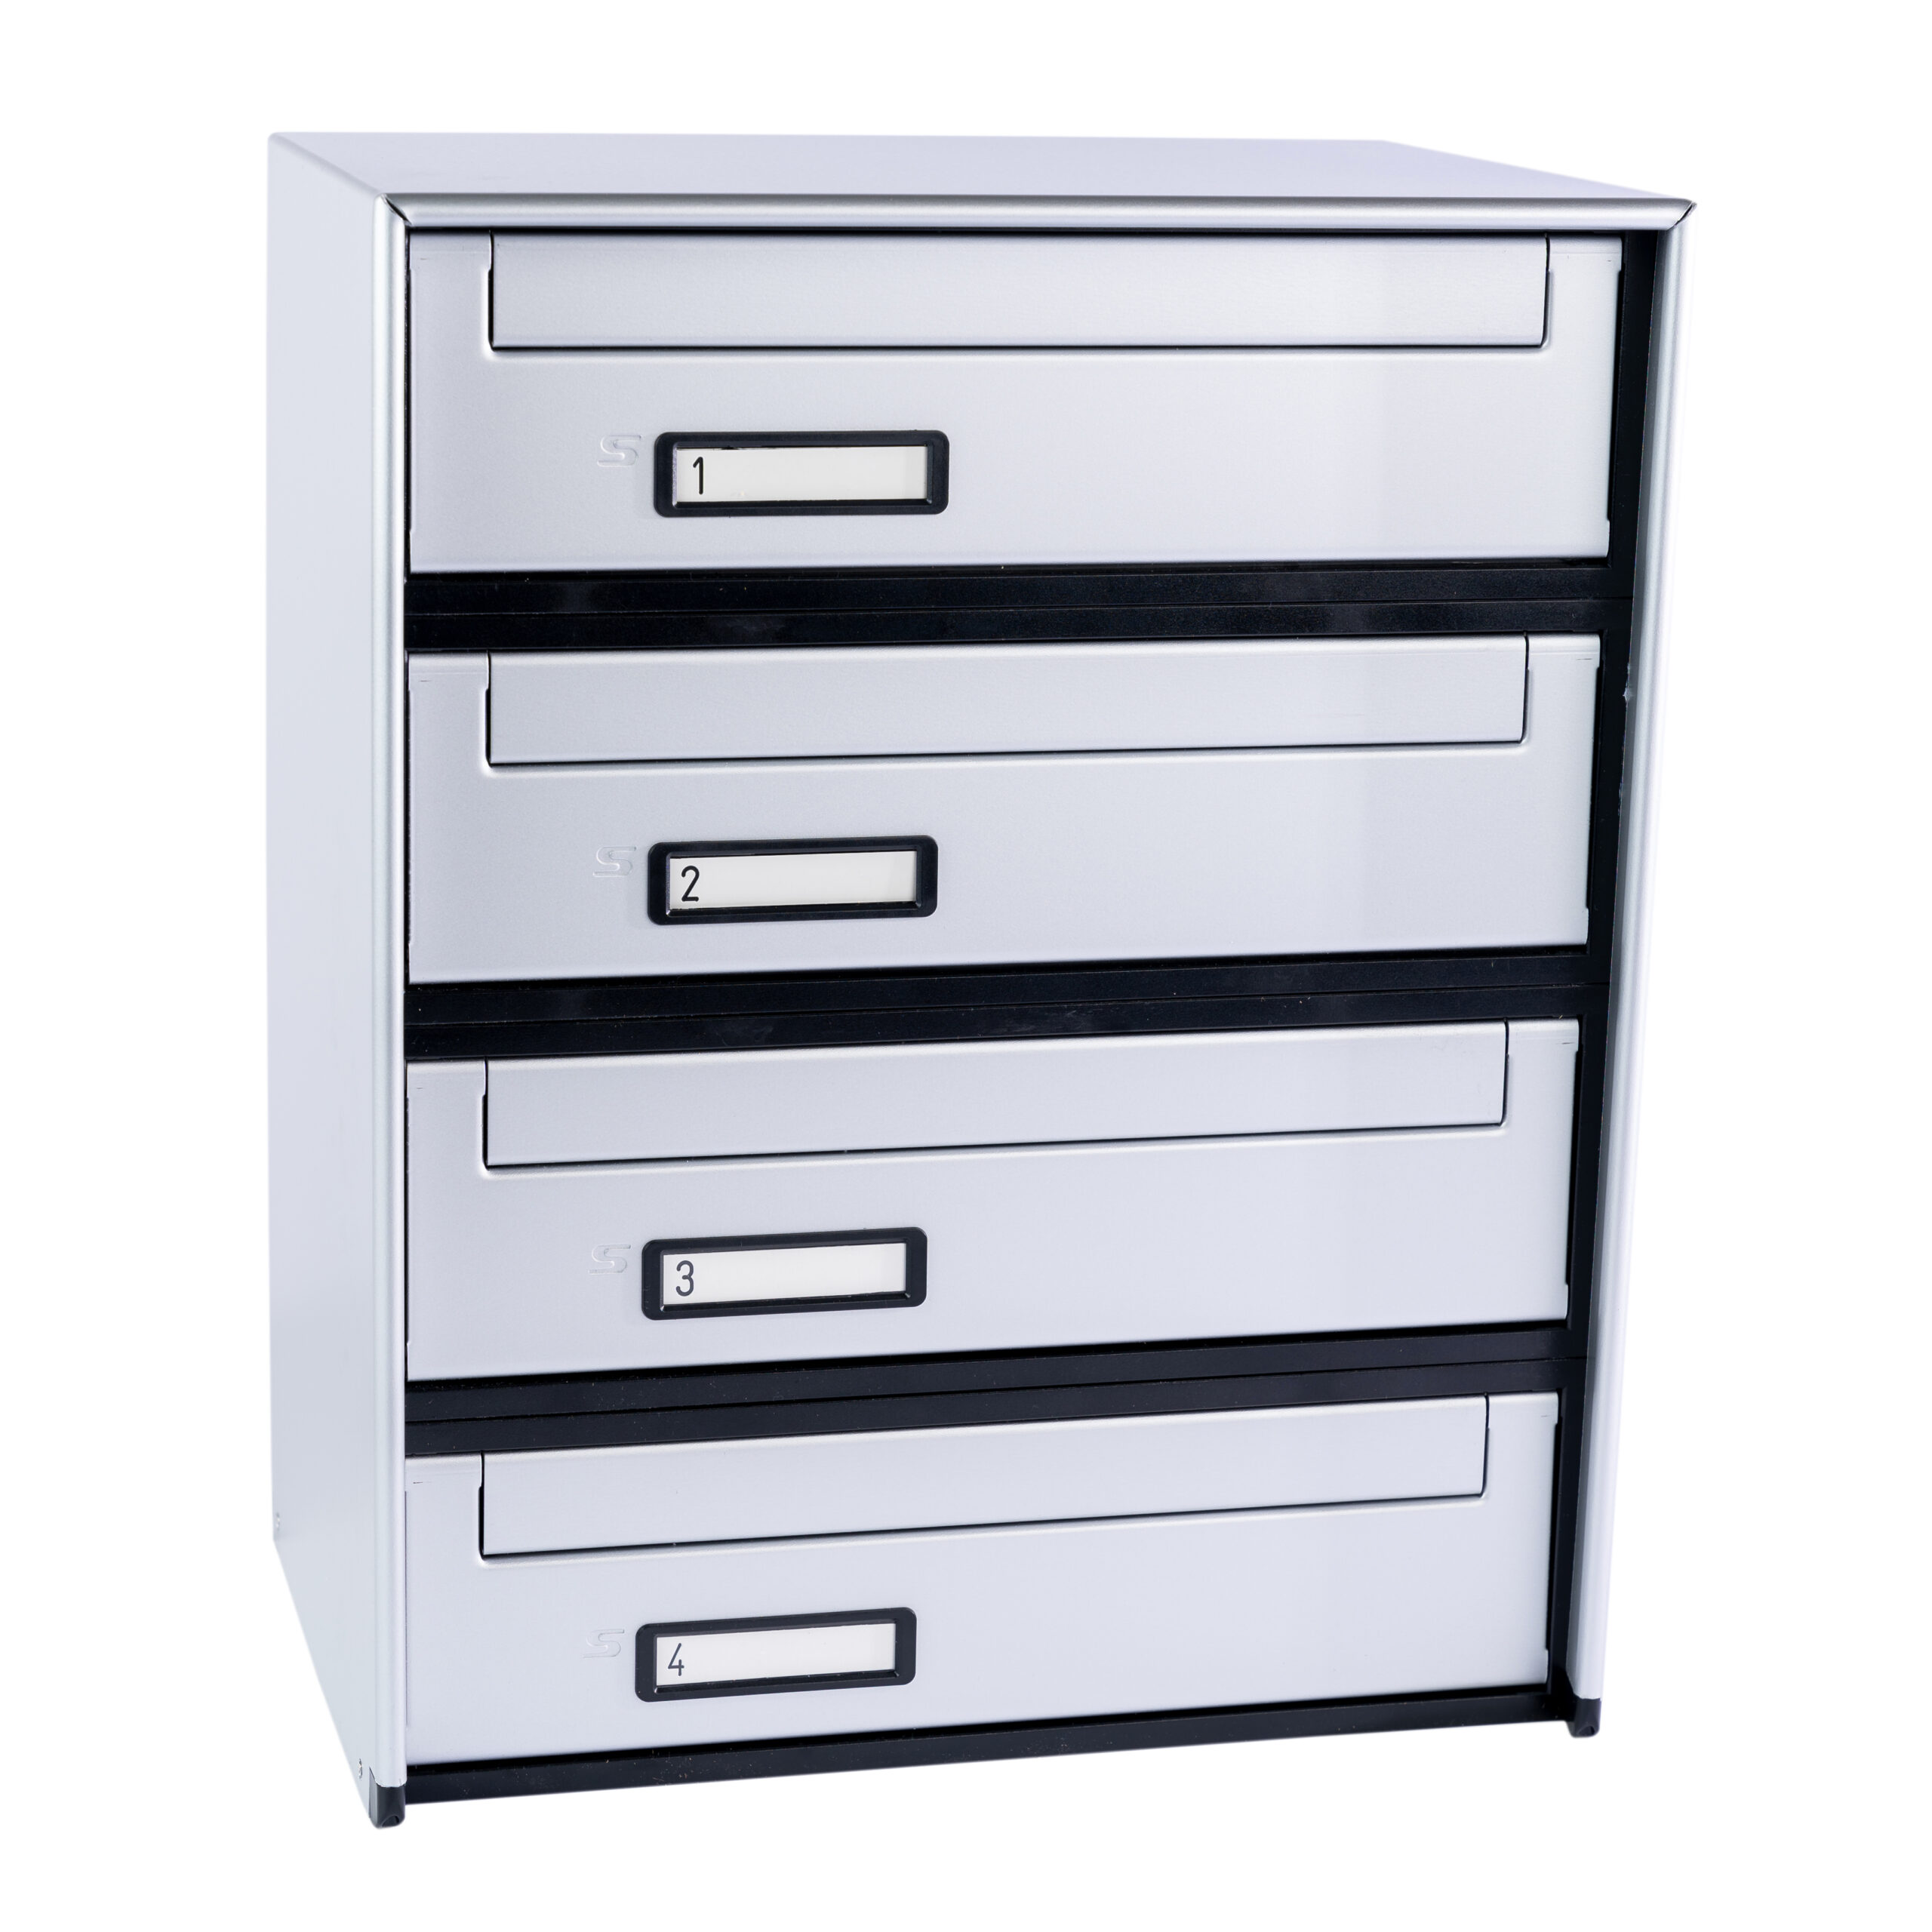 SC6 standard modular letterbox units with rear mail collection – 4 mailboxes